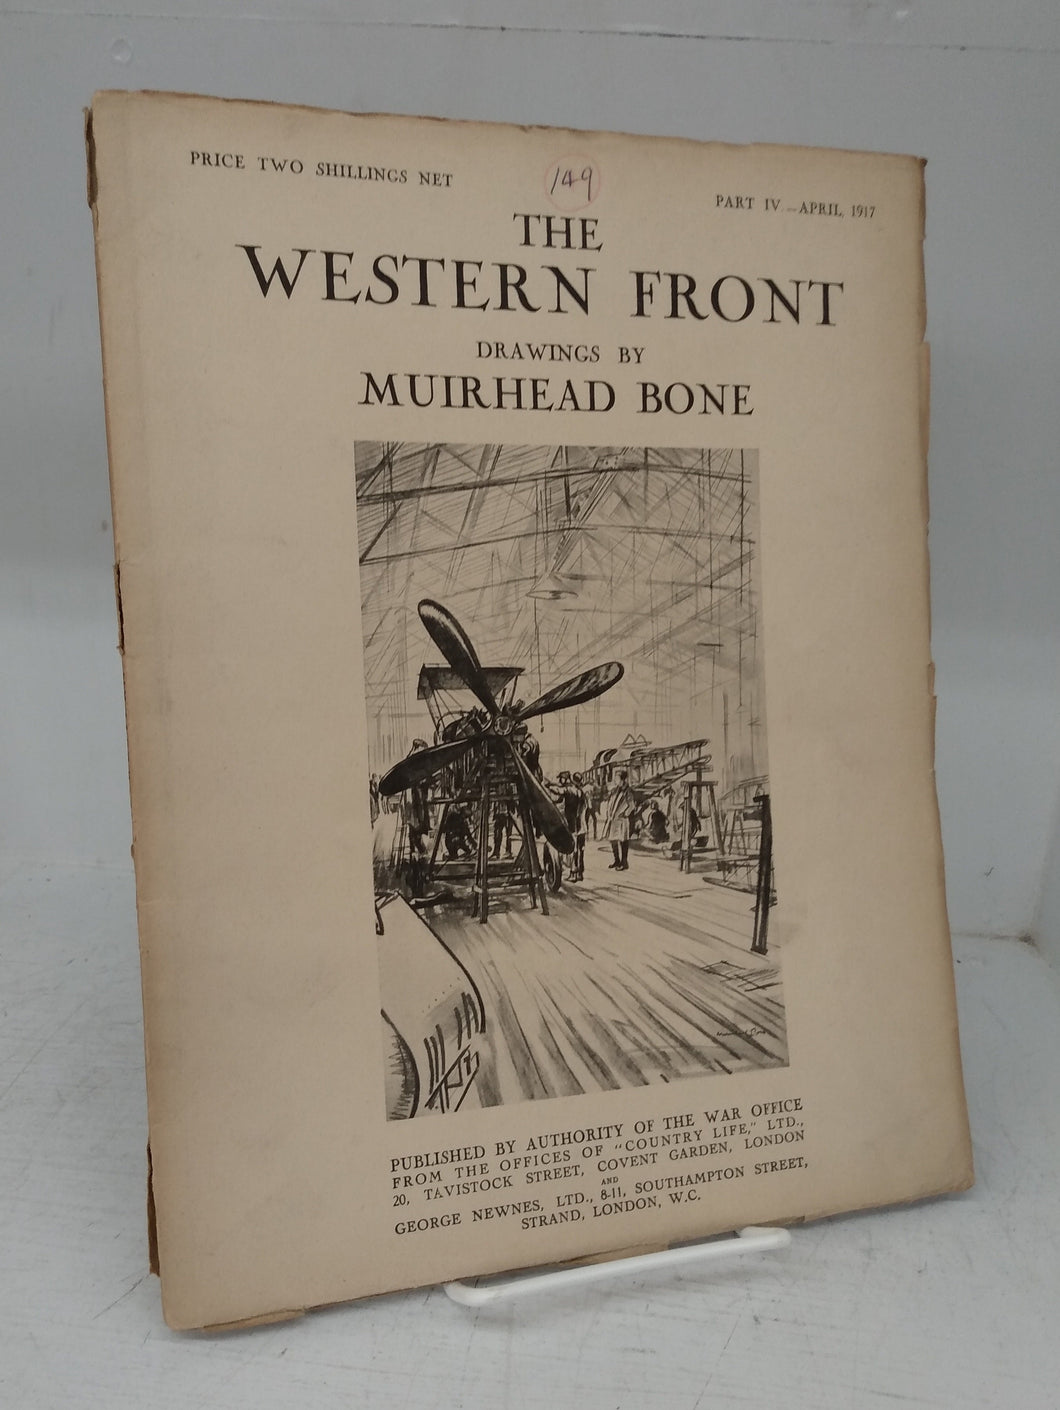 The Western Front: Drawings by Muirhead Bone, Part IV - April 1917